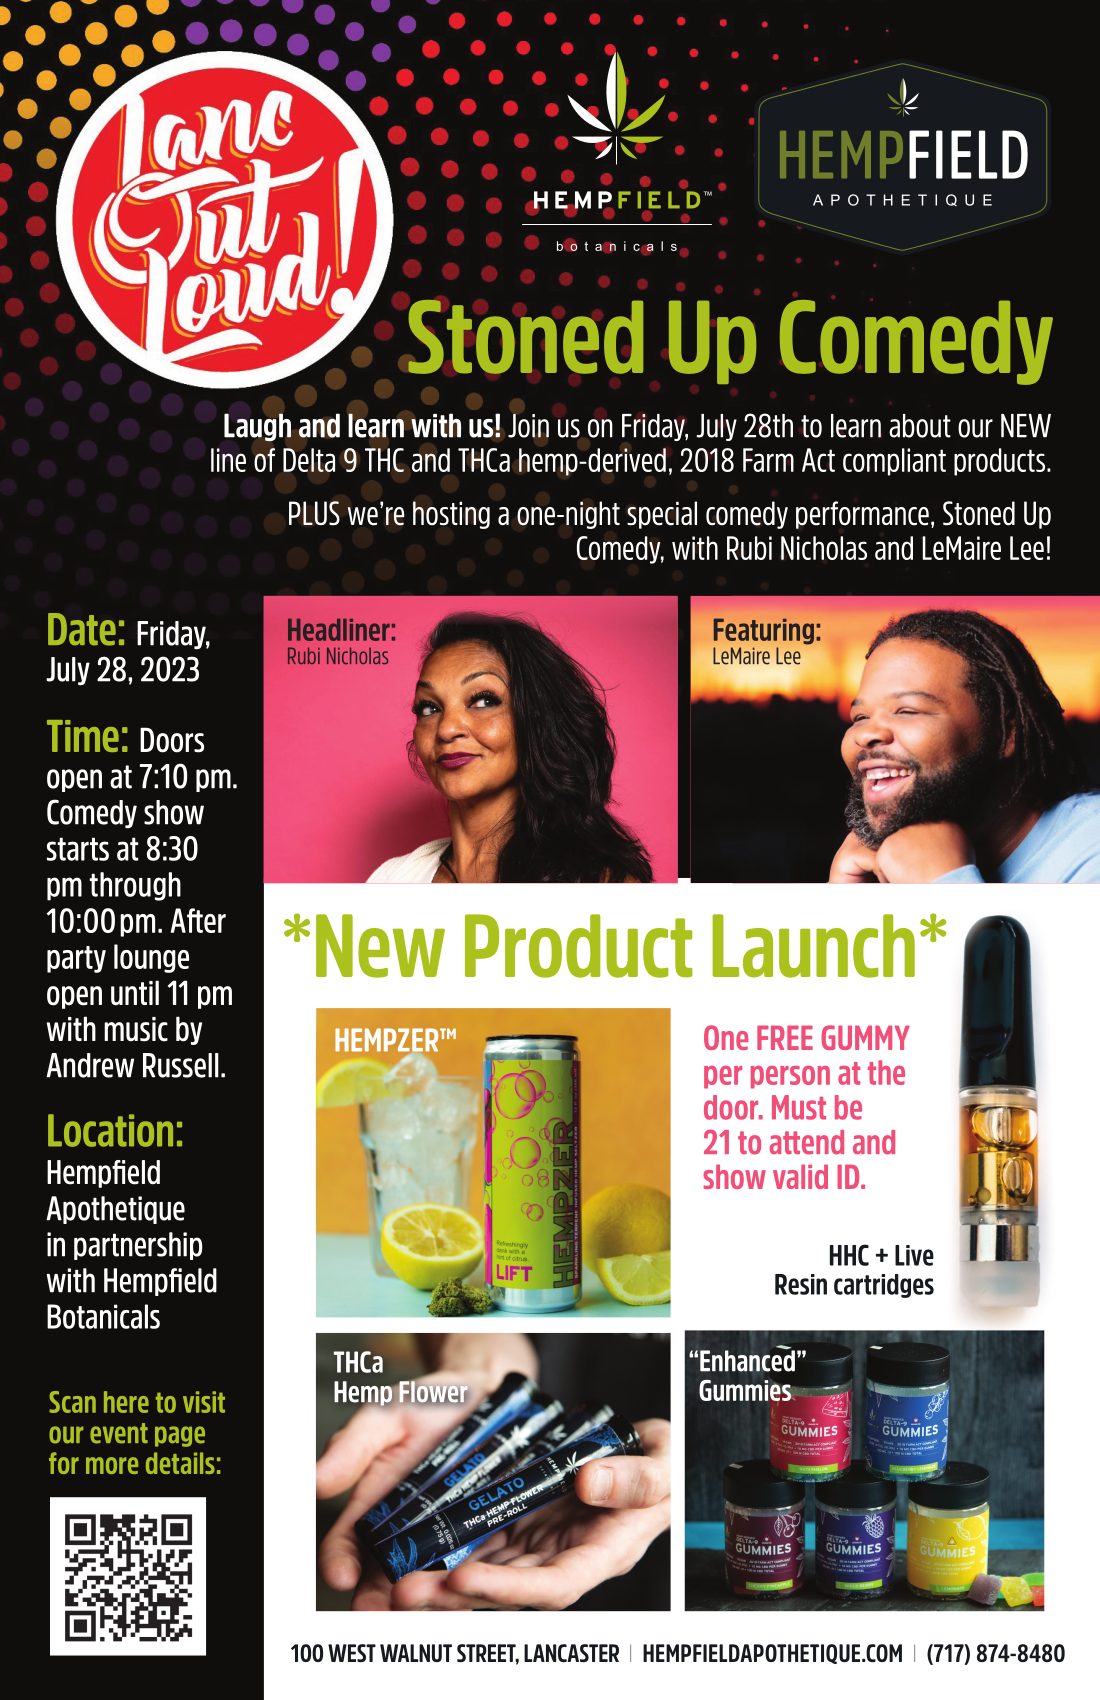 Stoned Up Comedy Night at Hempfield Apothetique | Lancaster PA Comedy